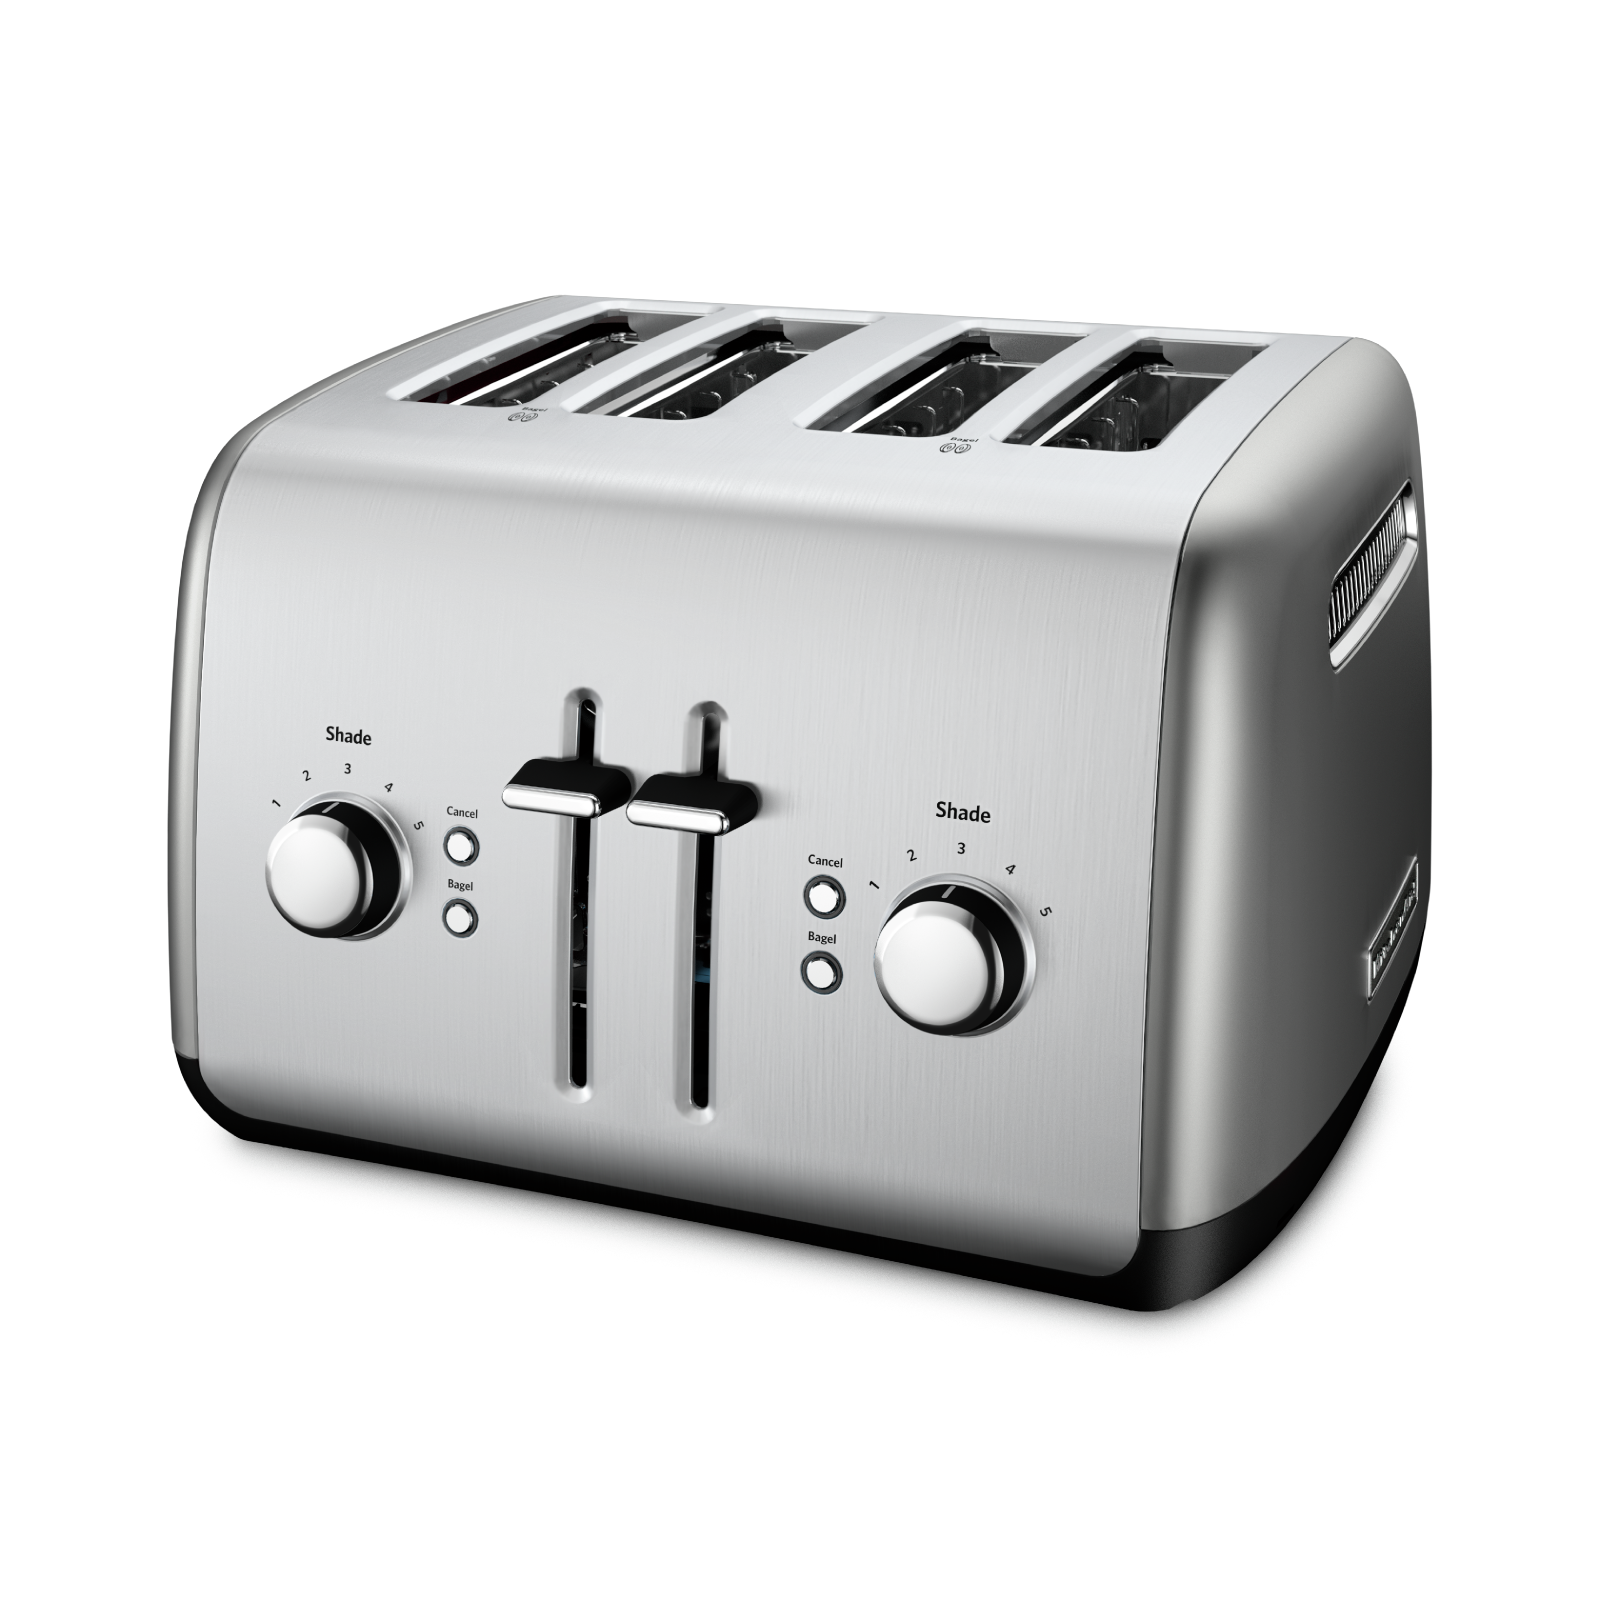 KitchenAid - Manual 4-Slice Toaster with Manual High-Lift Lever in Silver - KMT4115CU